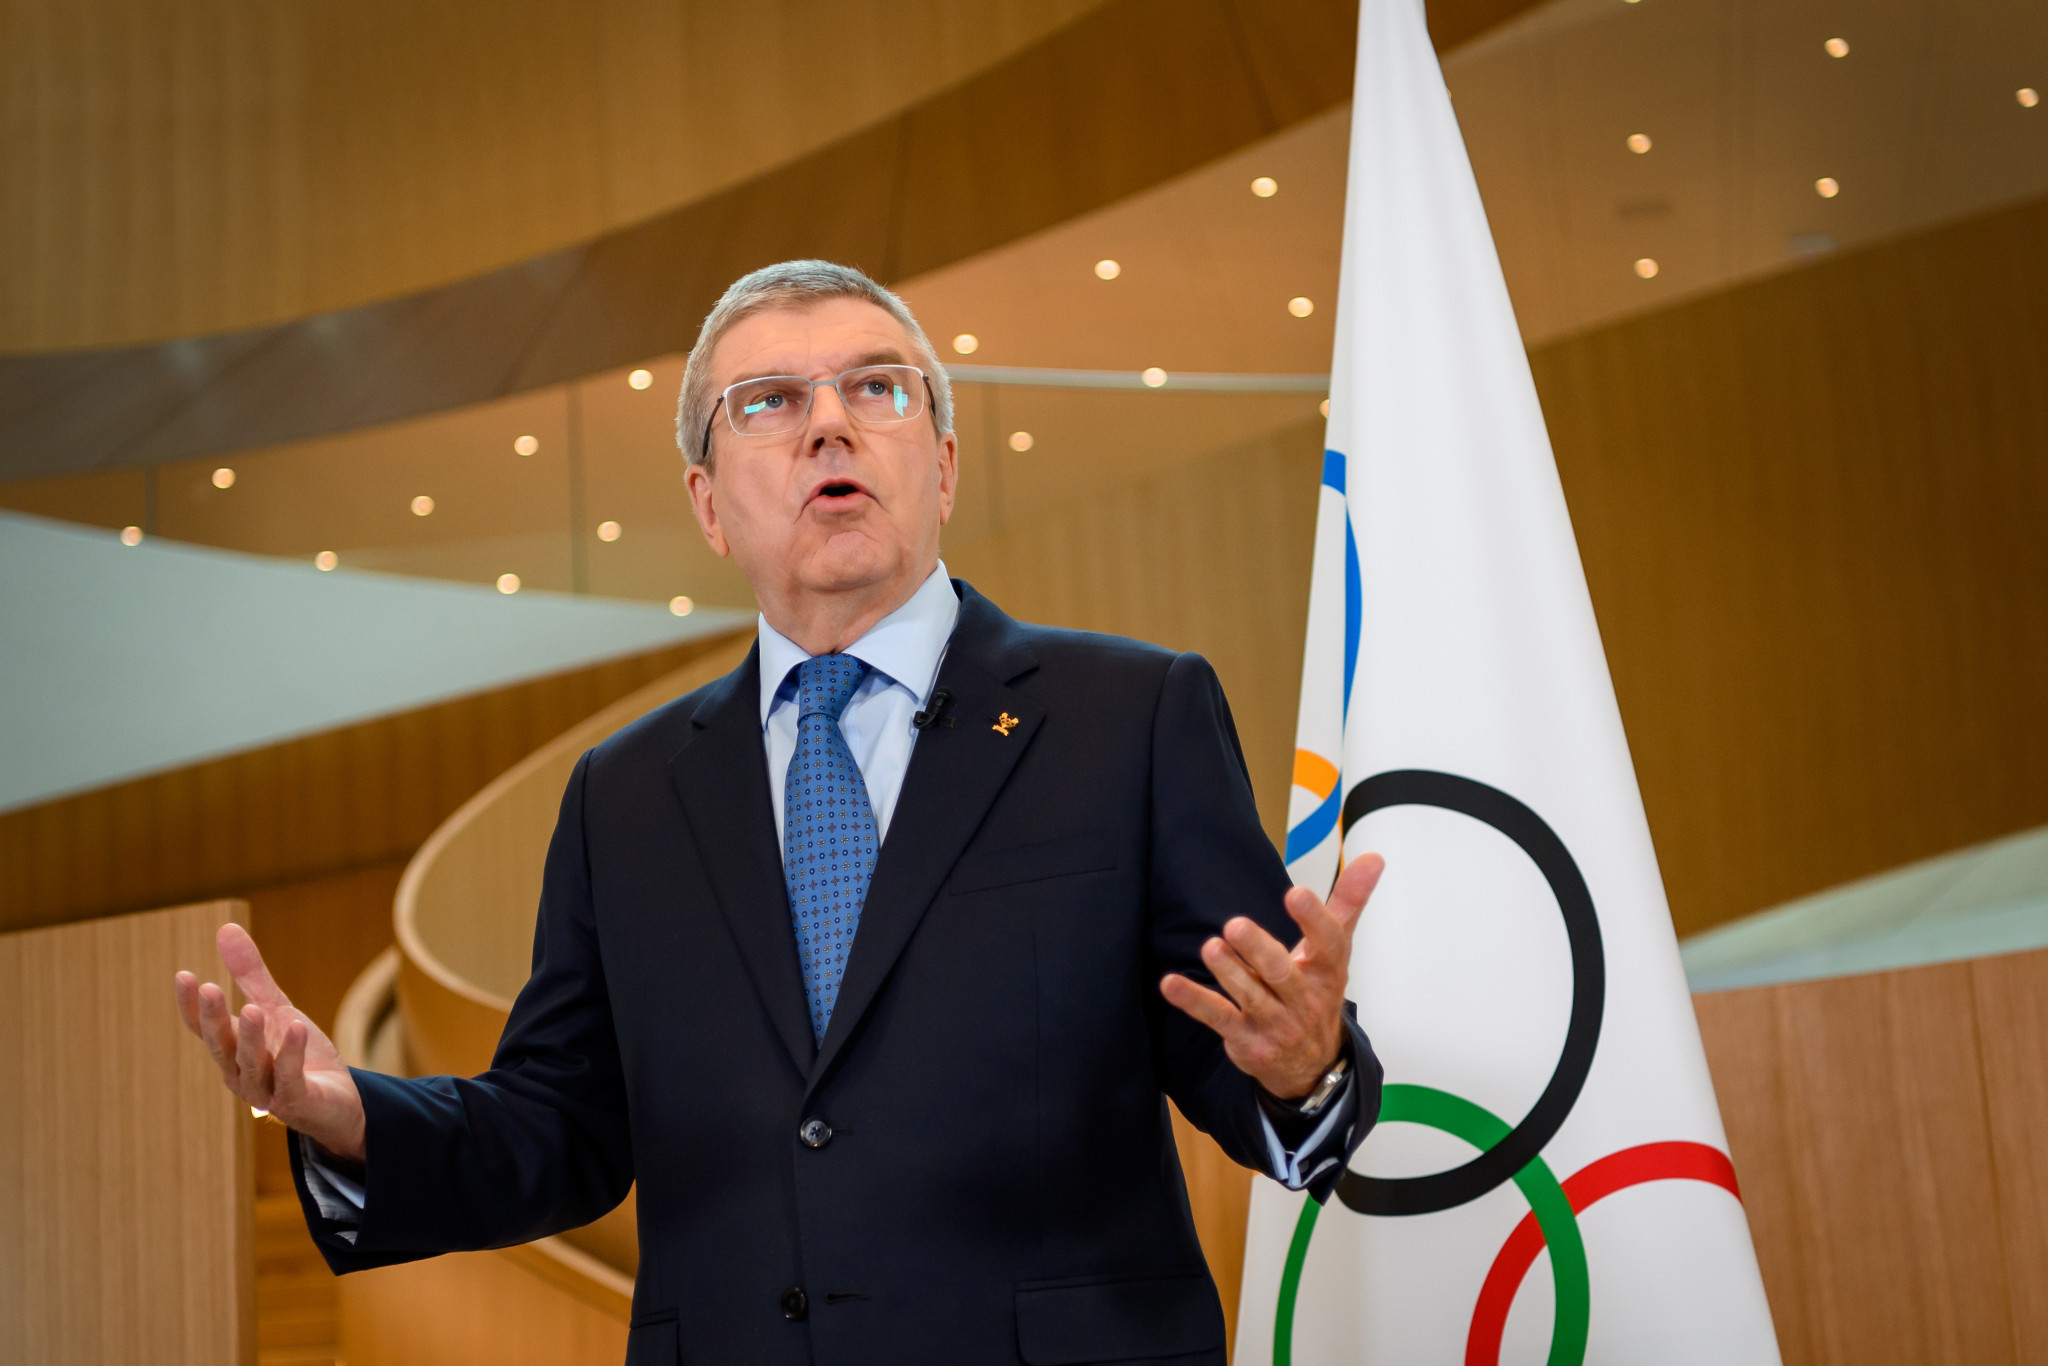 IOC President Thomas Bach said the words cancellation and postponement of Tokyo 2020 were not mentioned during the organisation's Executive Board meeting ©Getty Images